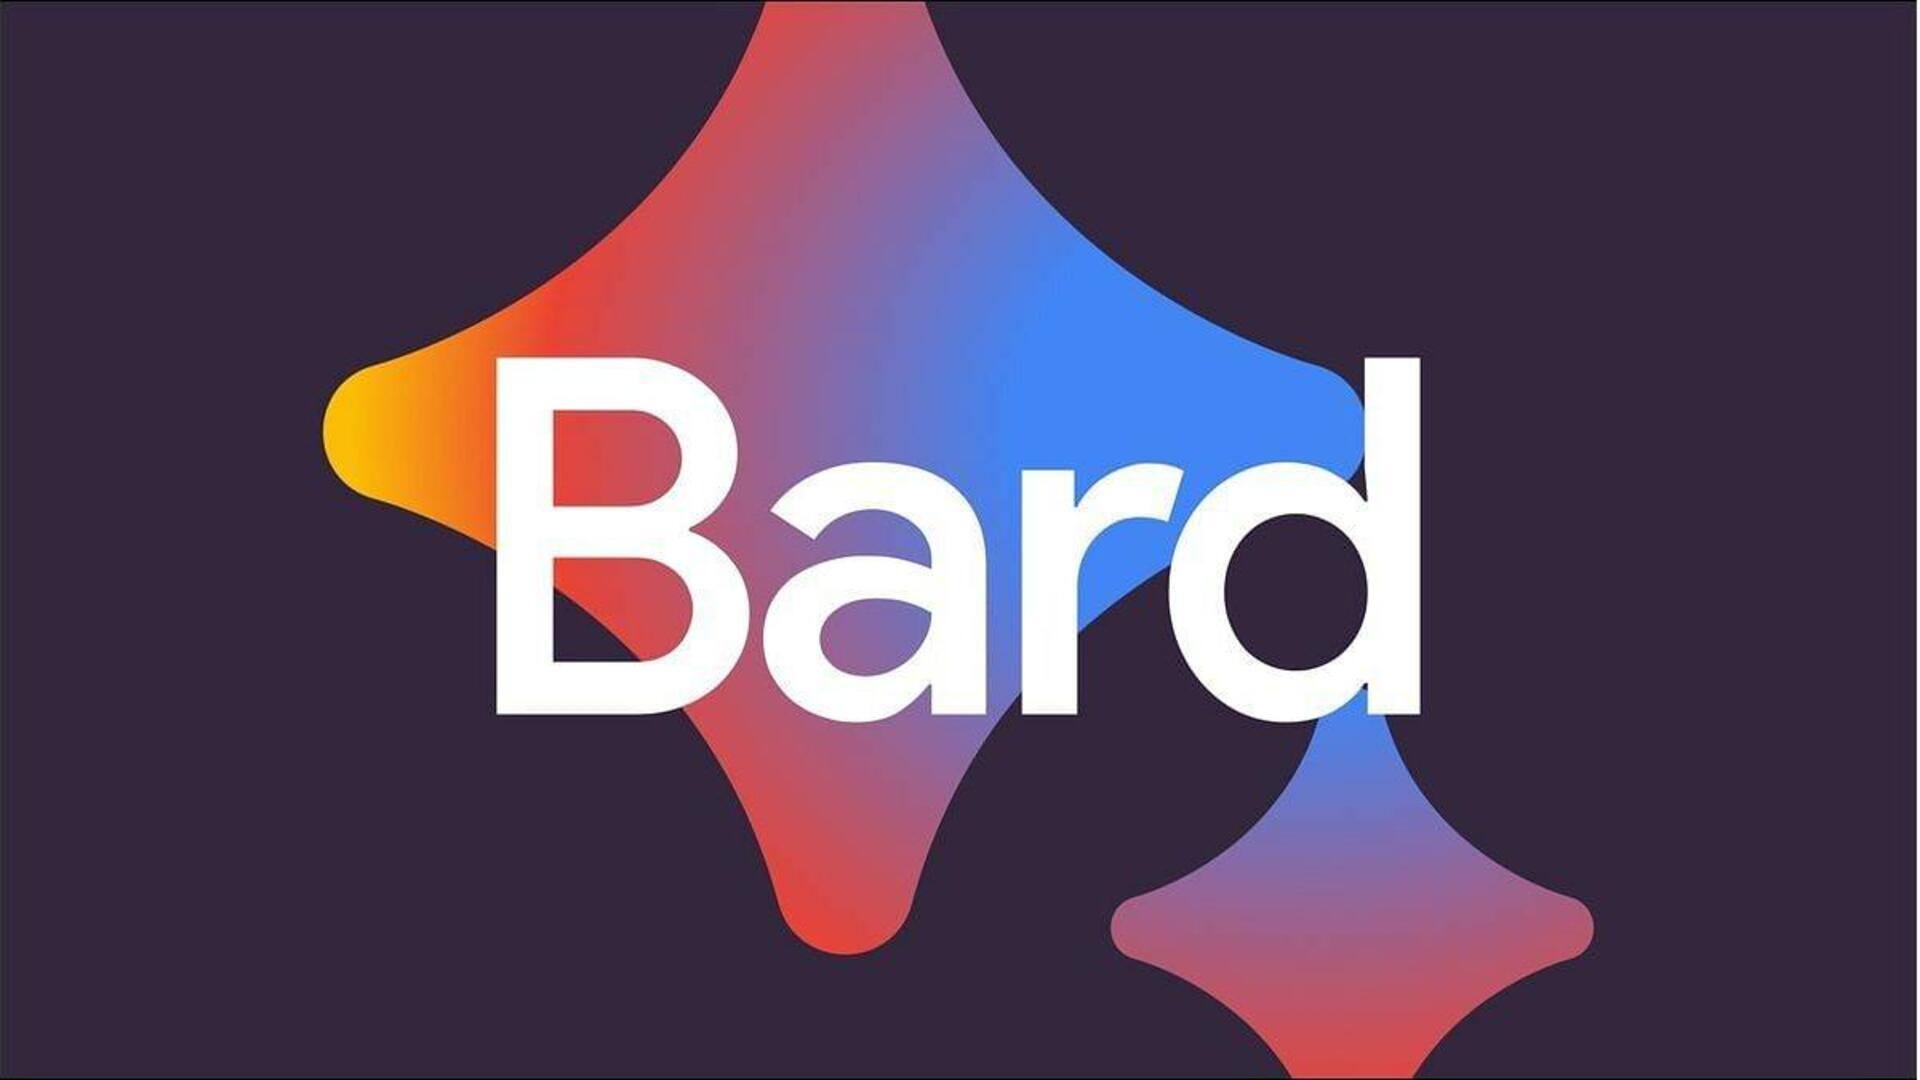 Google working on paid upgrade for Bard AI chatbot